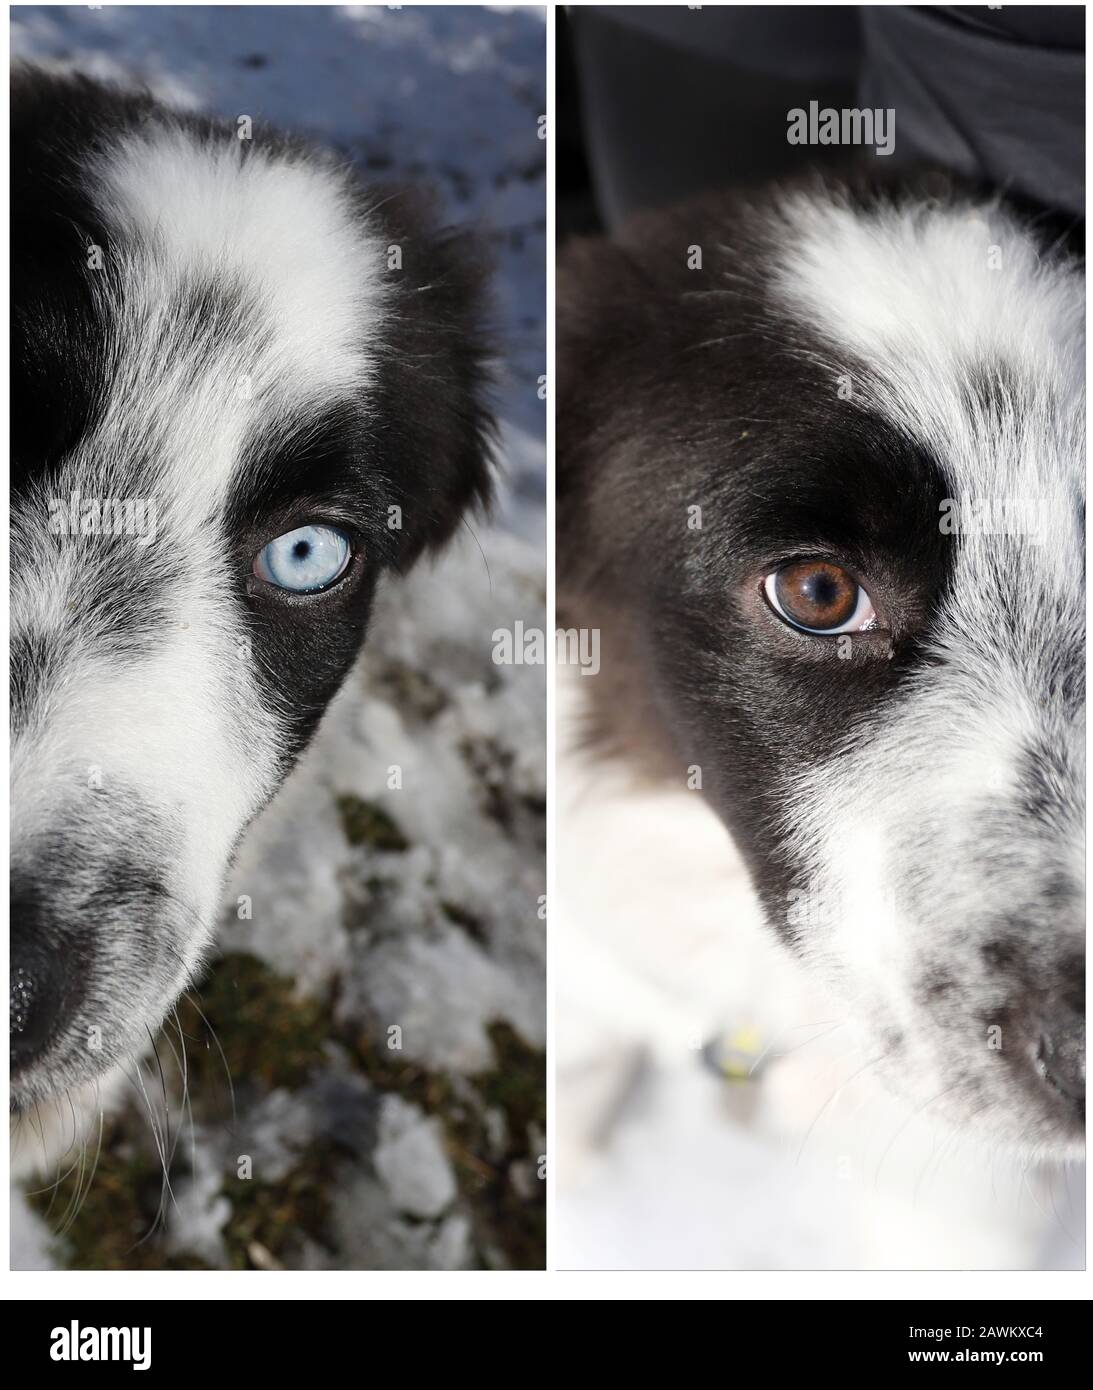 Dog With Heterochromia Different Colored Eyes On Sunlight Two Photos One Brown Eye One Blue Eye Stock Photo Alamy